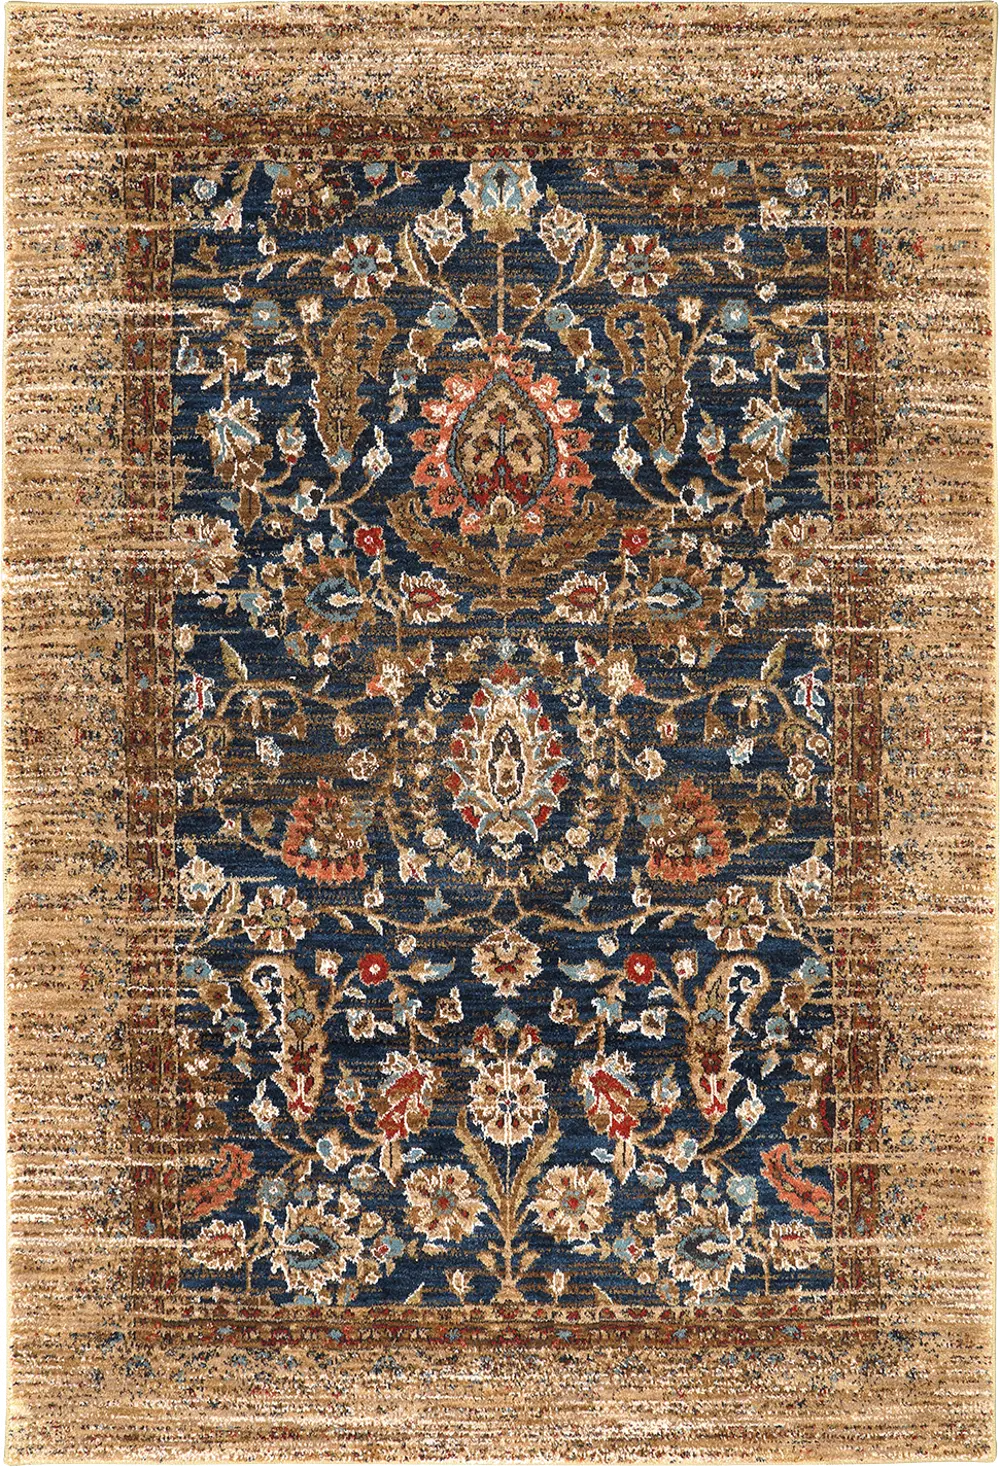 90666-10034/8X11GOLD Spice Market 8 x 11 Charax Gold Area Rug-1